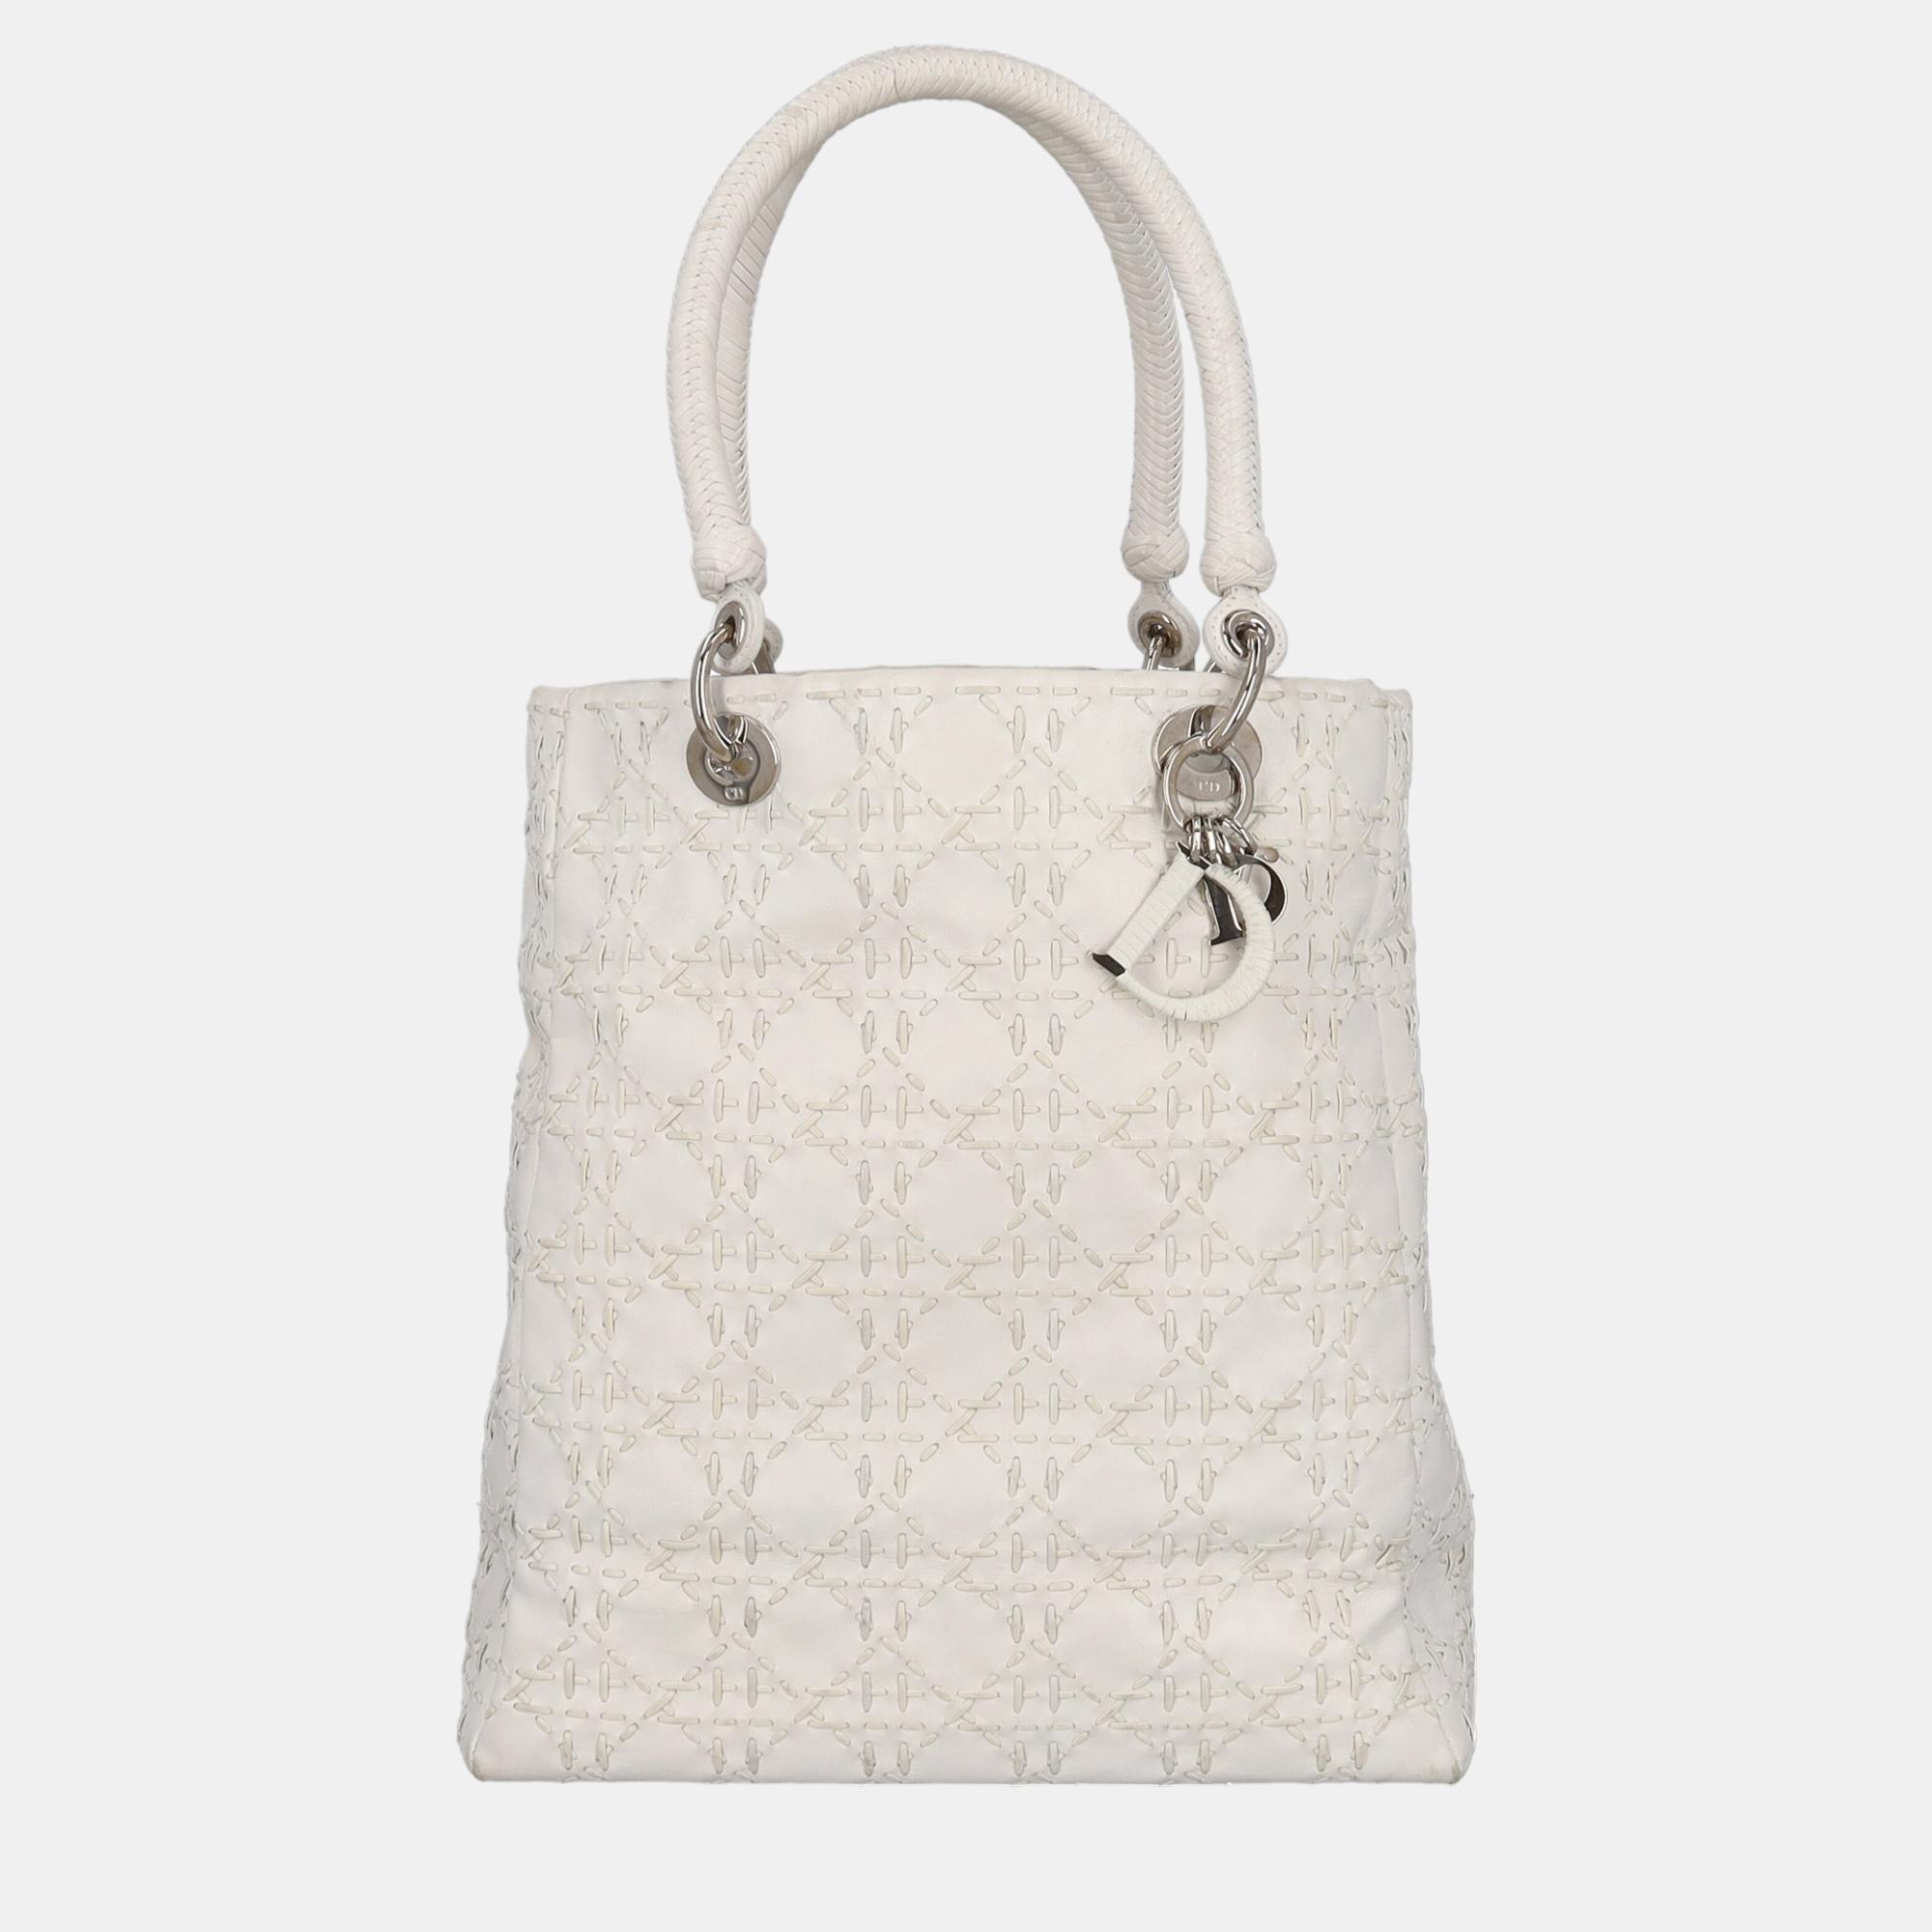 Dior Women's Leather Tote Bag - White - One Size